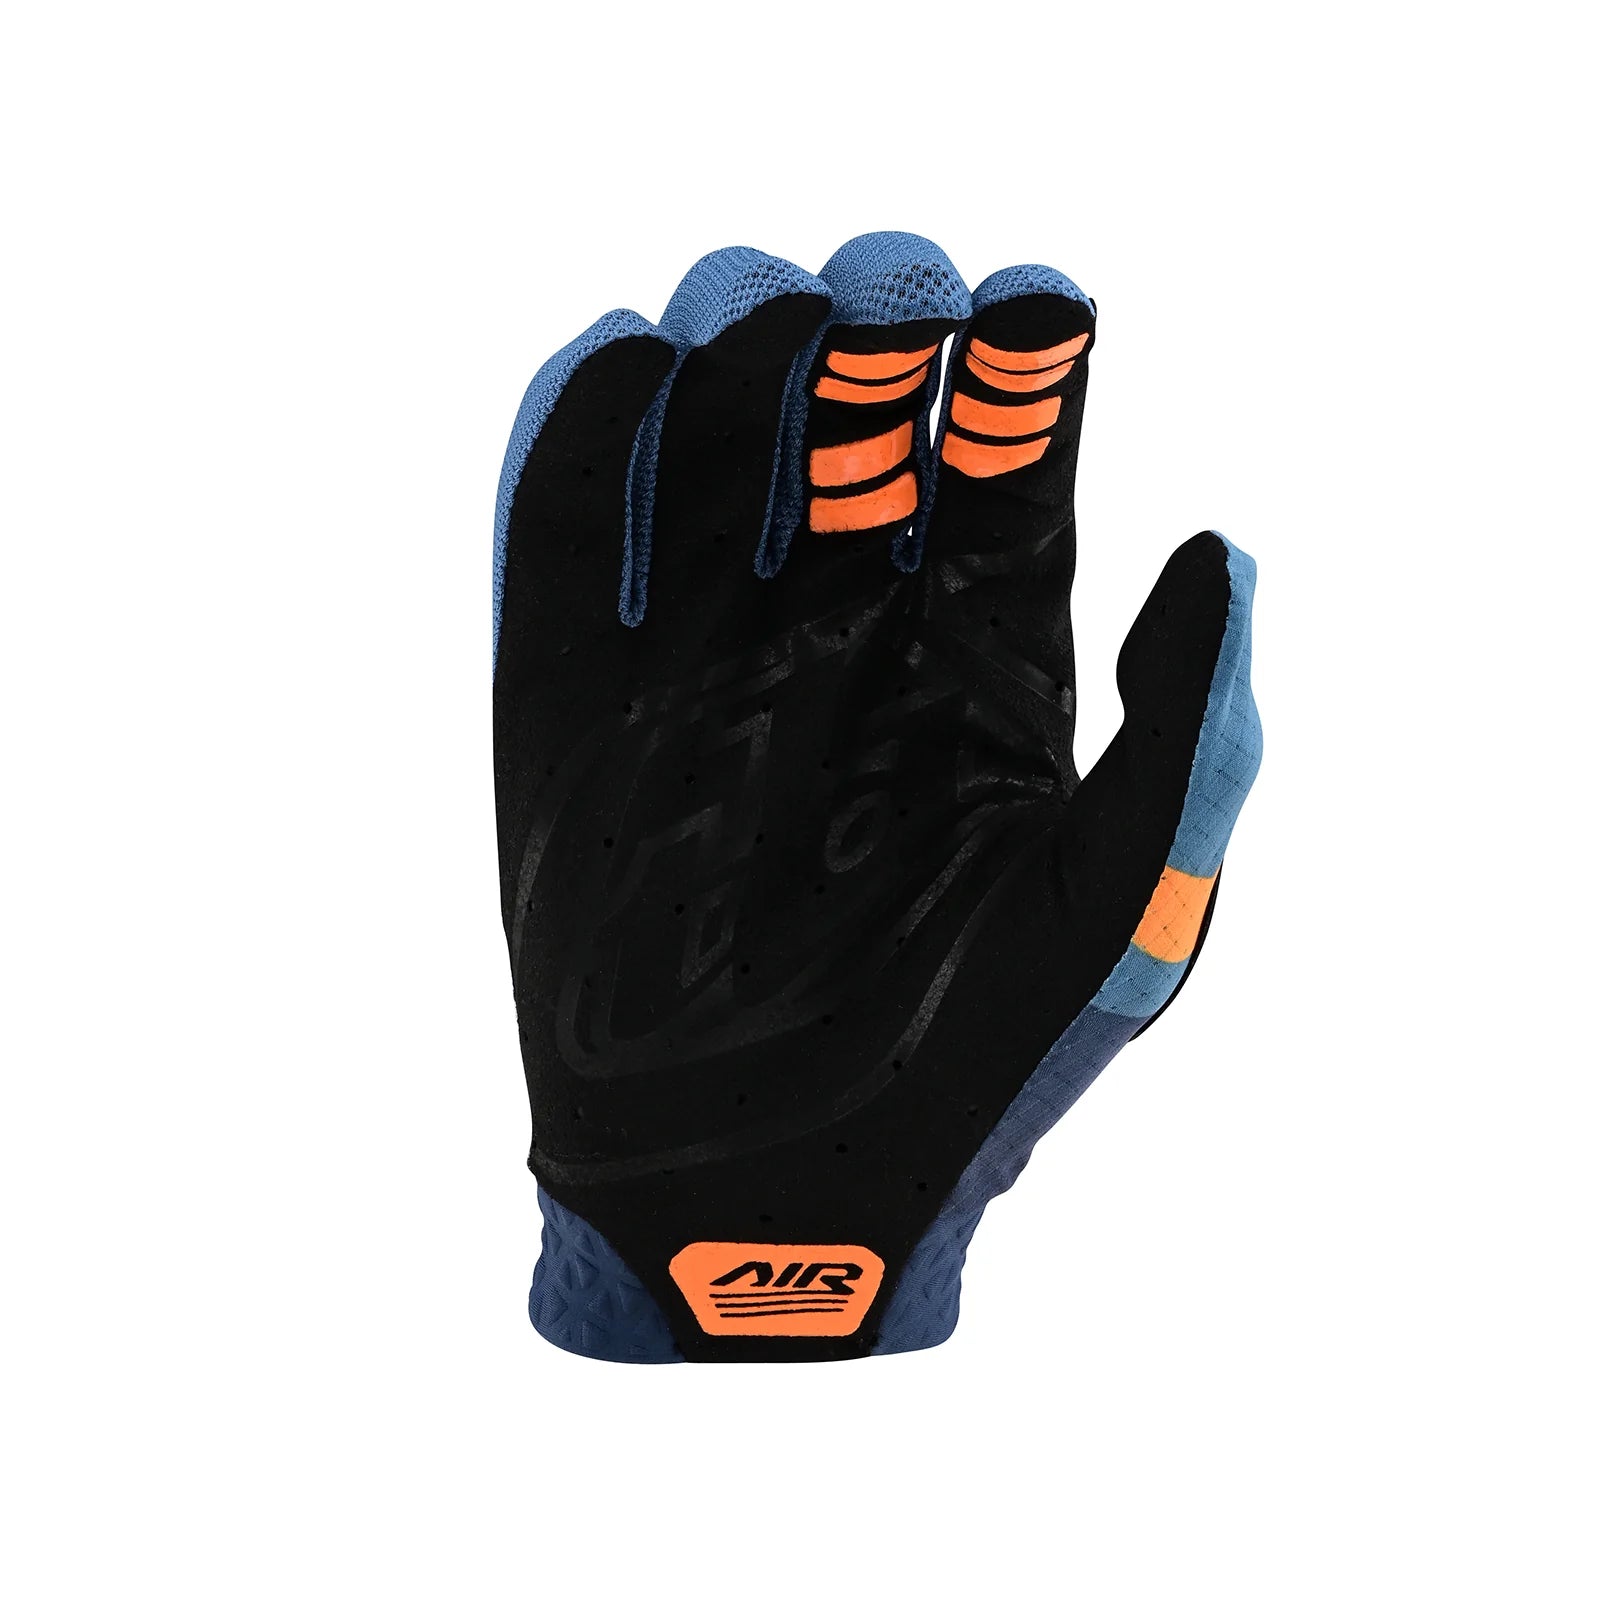 A single black and blue TLD Air Glove Pinned Blue full-finger glove with orange accents from Troy Lee Designs.